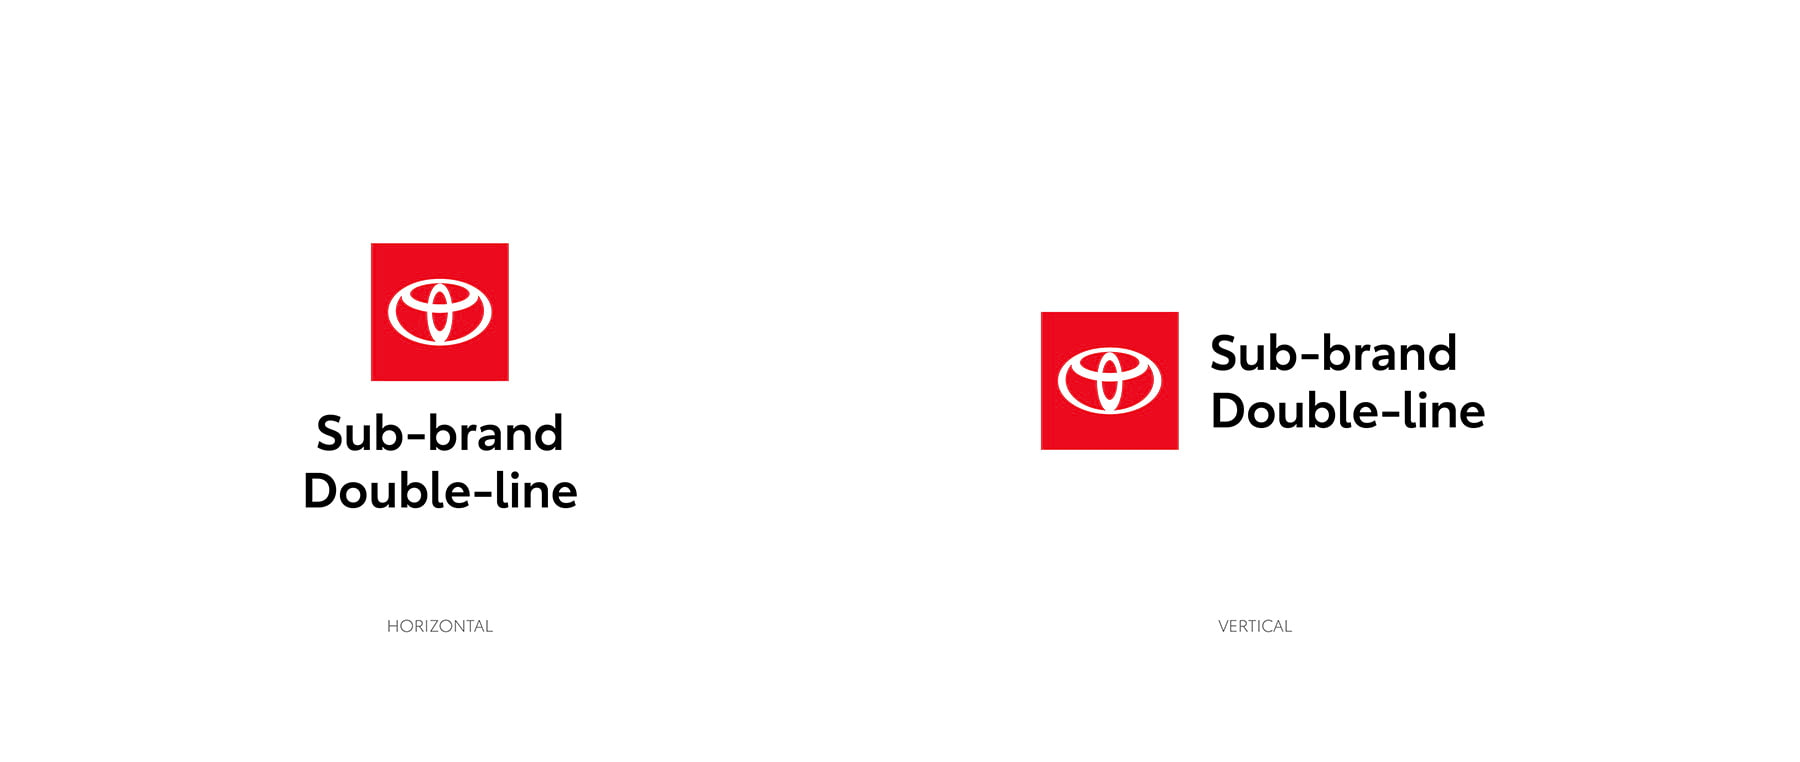 Horizontal and vertical double line sub brand logos